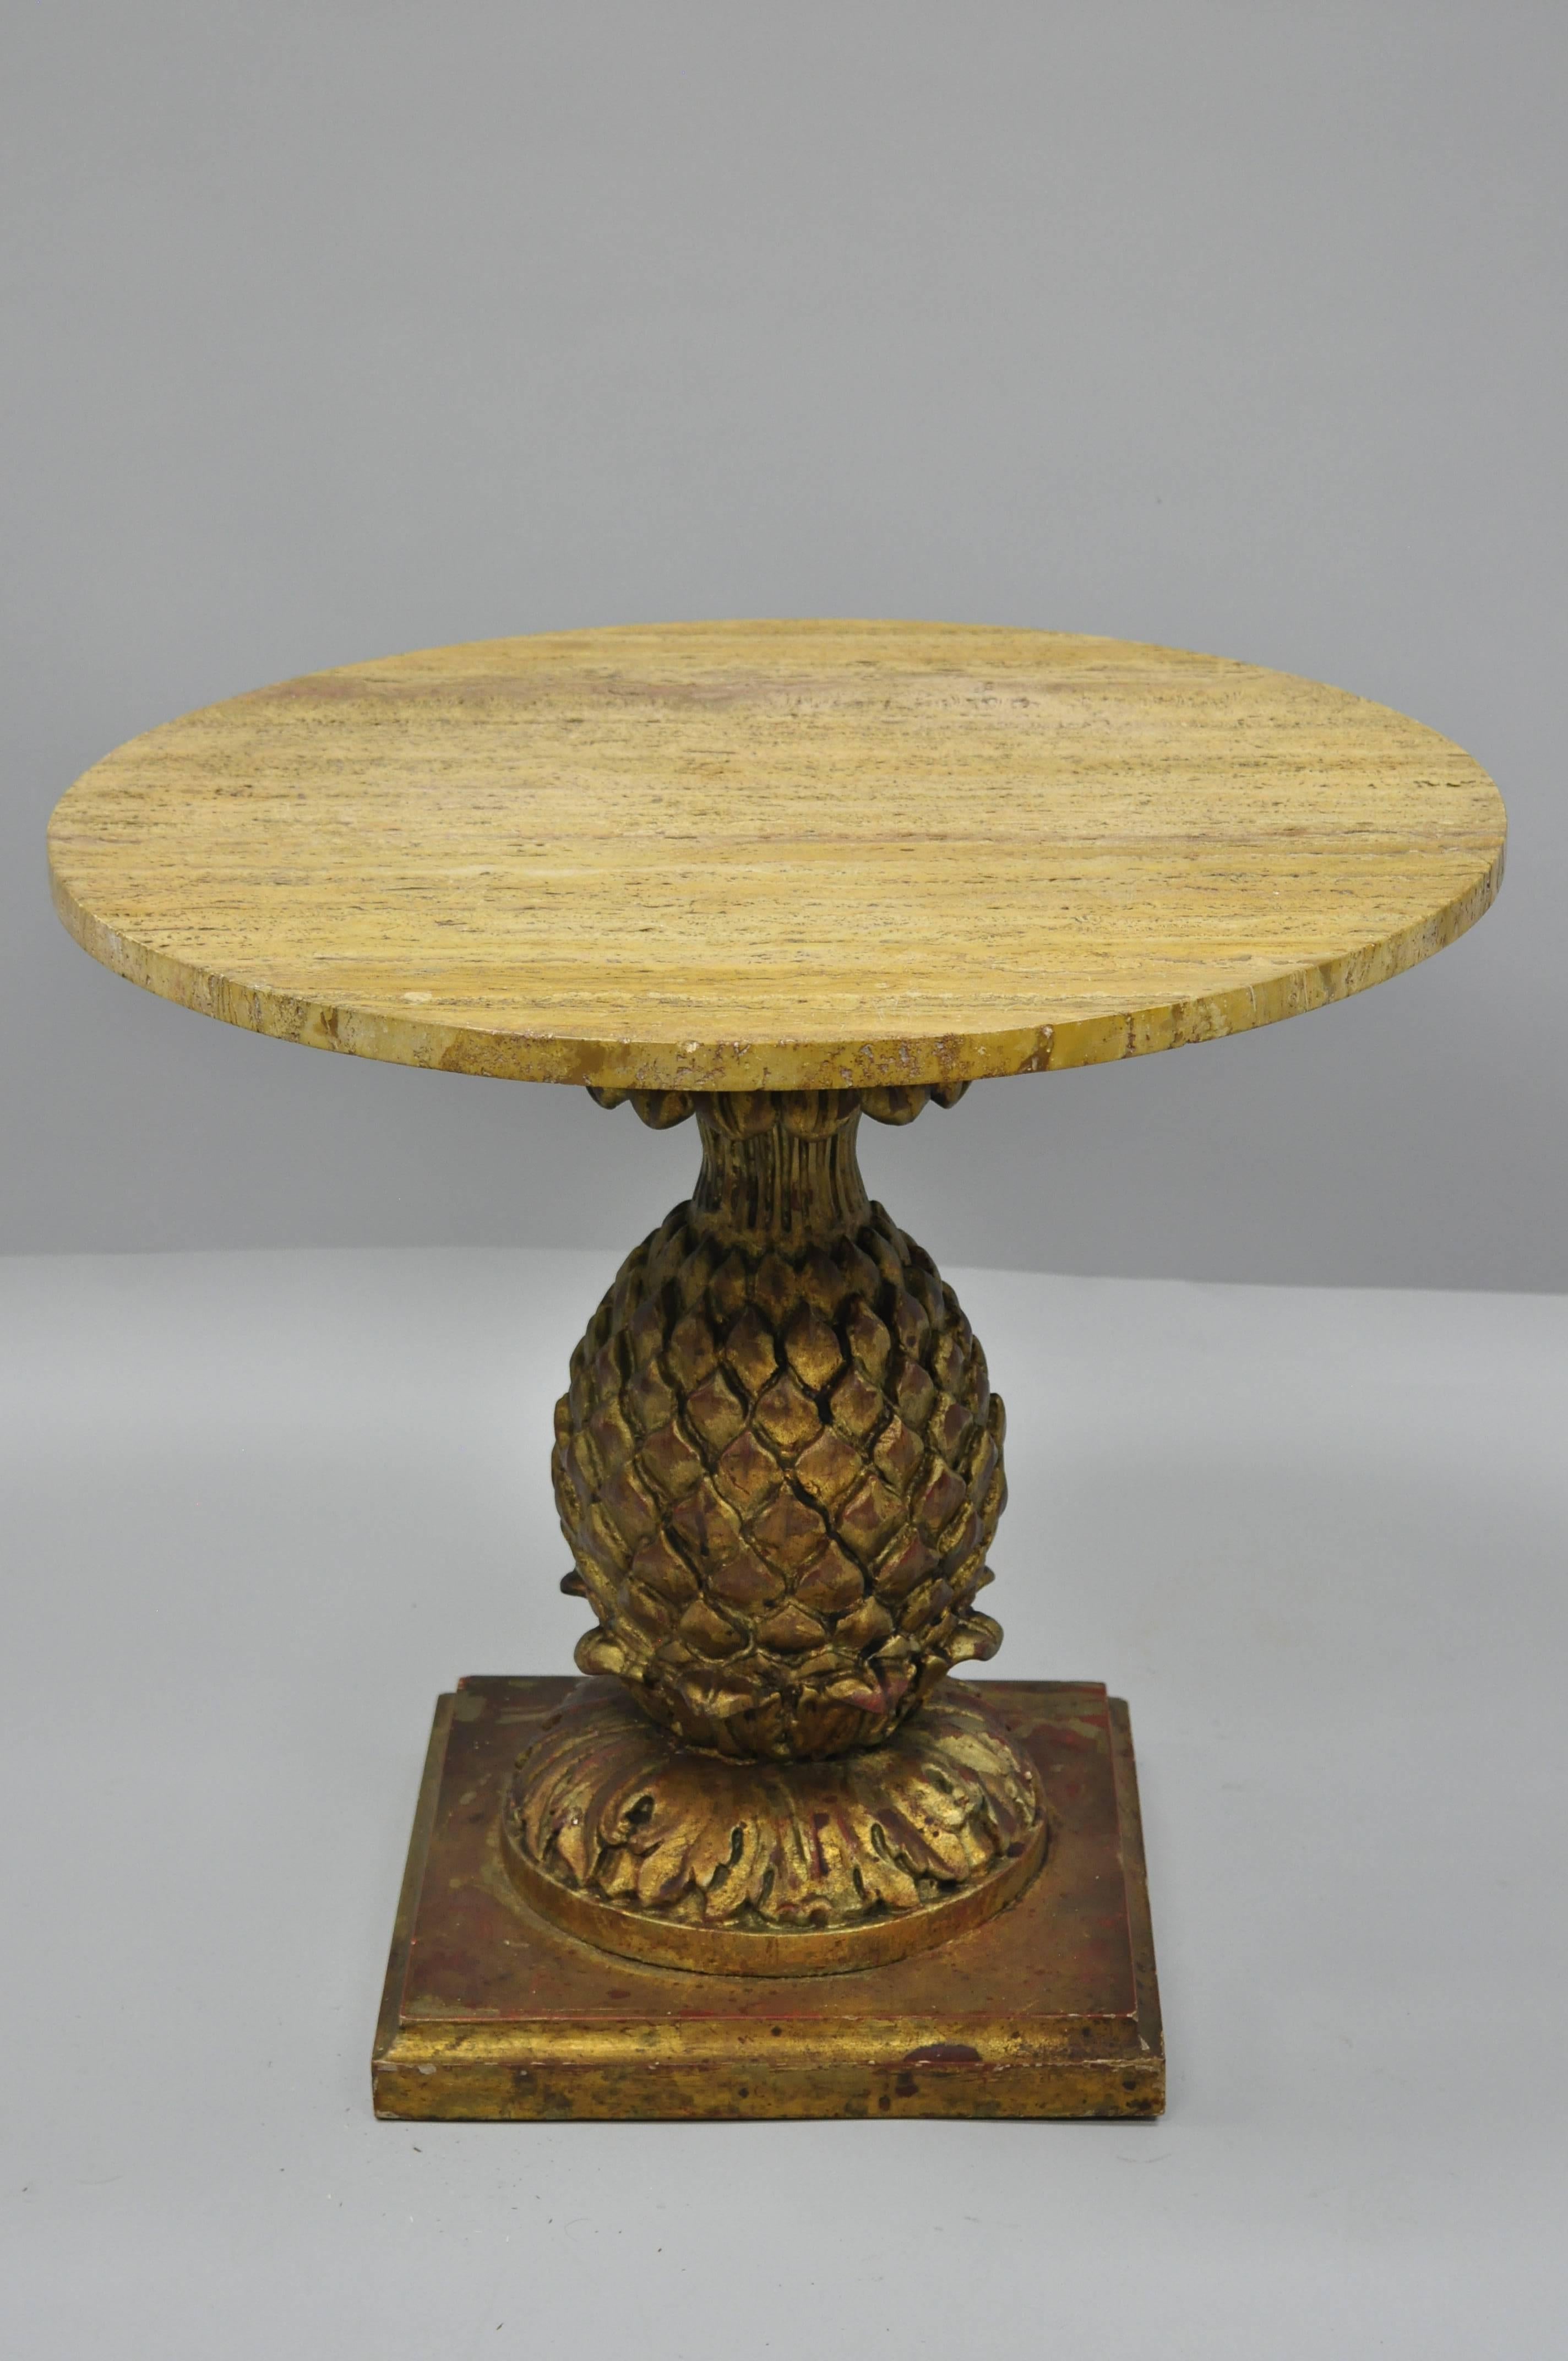 Vintage Italian Hollywood Regency giltwood carved pineapple travertine top side table. Item features hand-carved giltwood pineapple base, round travertine top, gold and red distressed painted finish, circa mid-20th century. Measurements 21